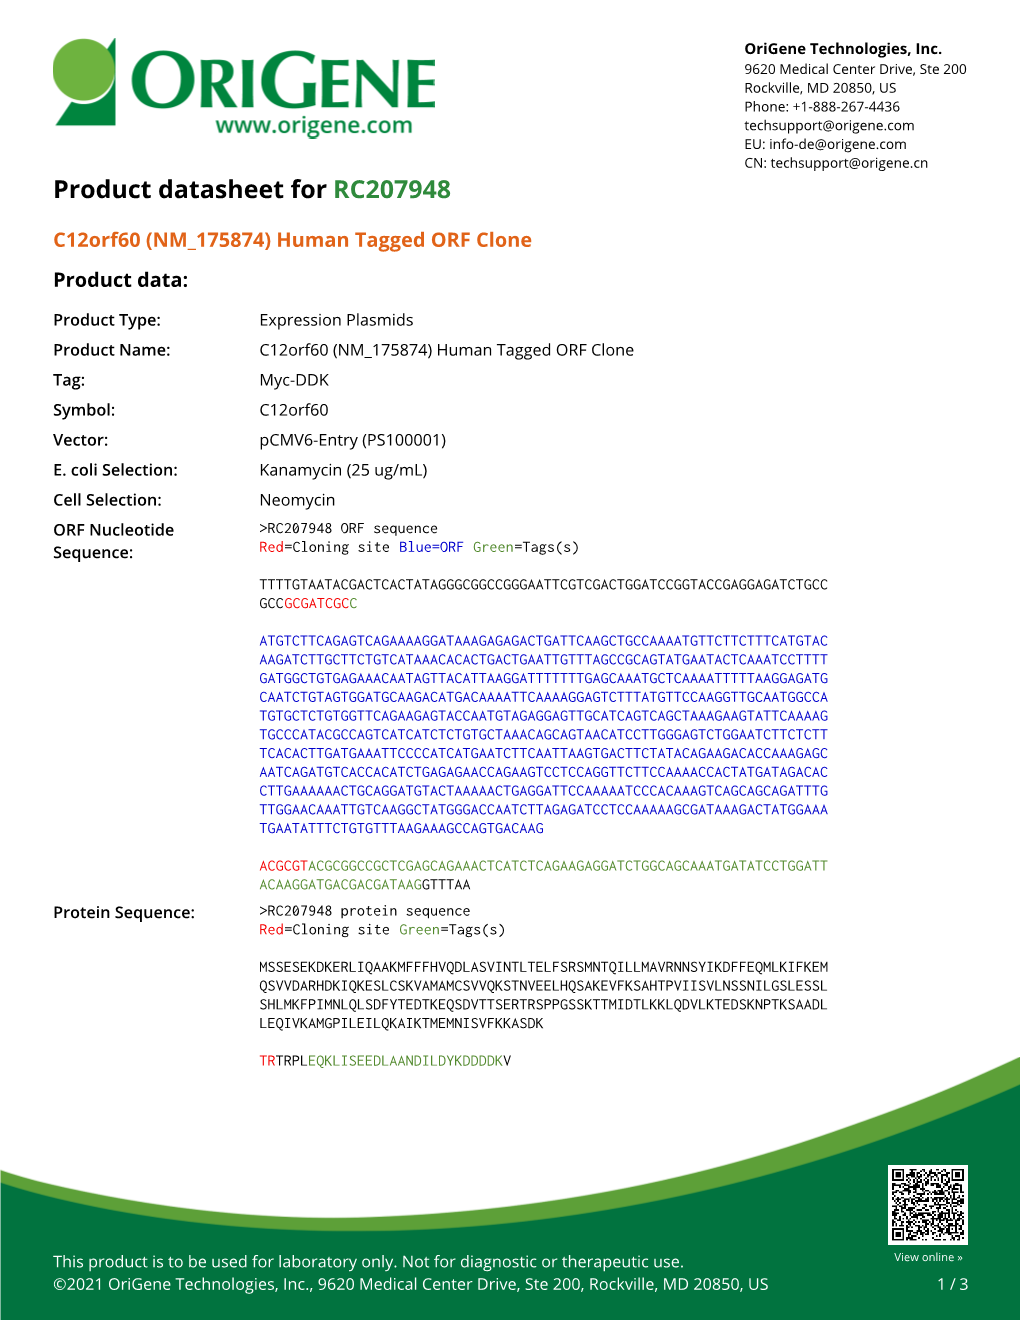 C12orf60 (NM 175874) Human Tagged ORF Clone – RC207948